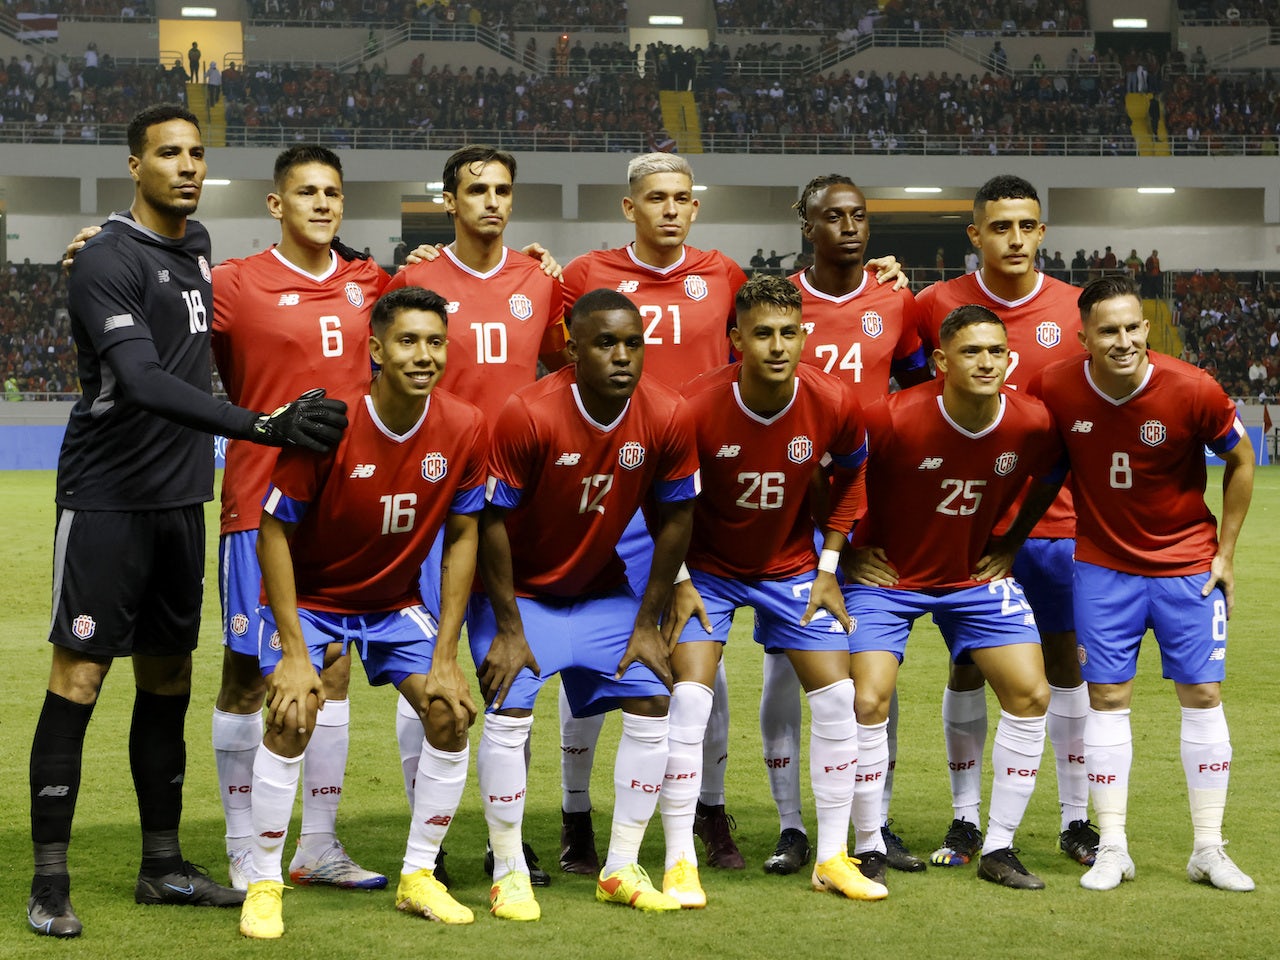 Costa Rica World Cup 2022 preview - prediction, fixtures, squad, star player